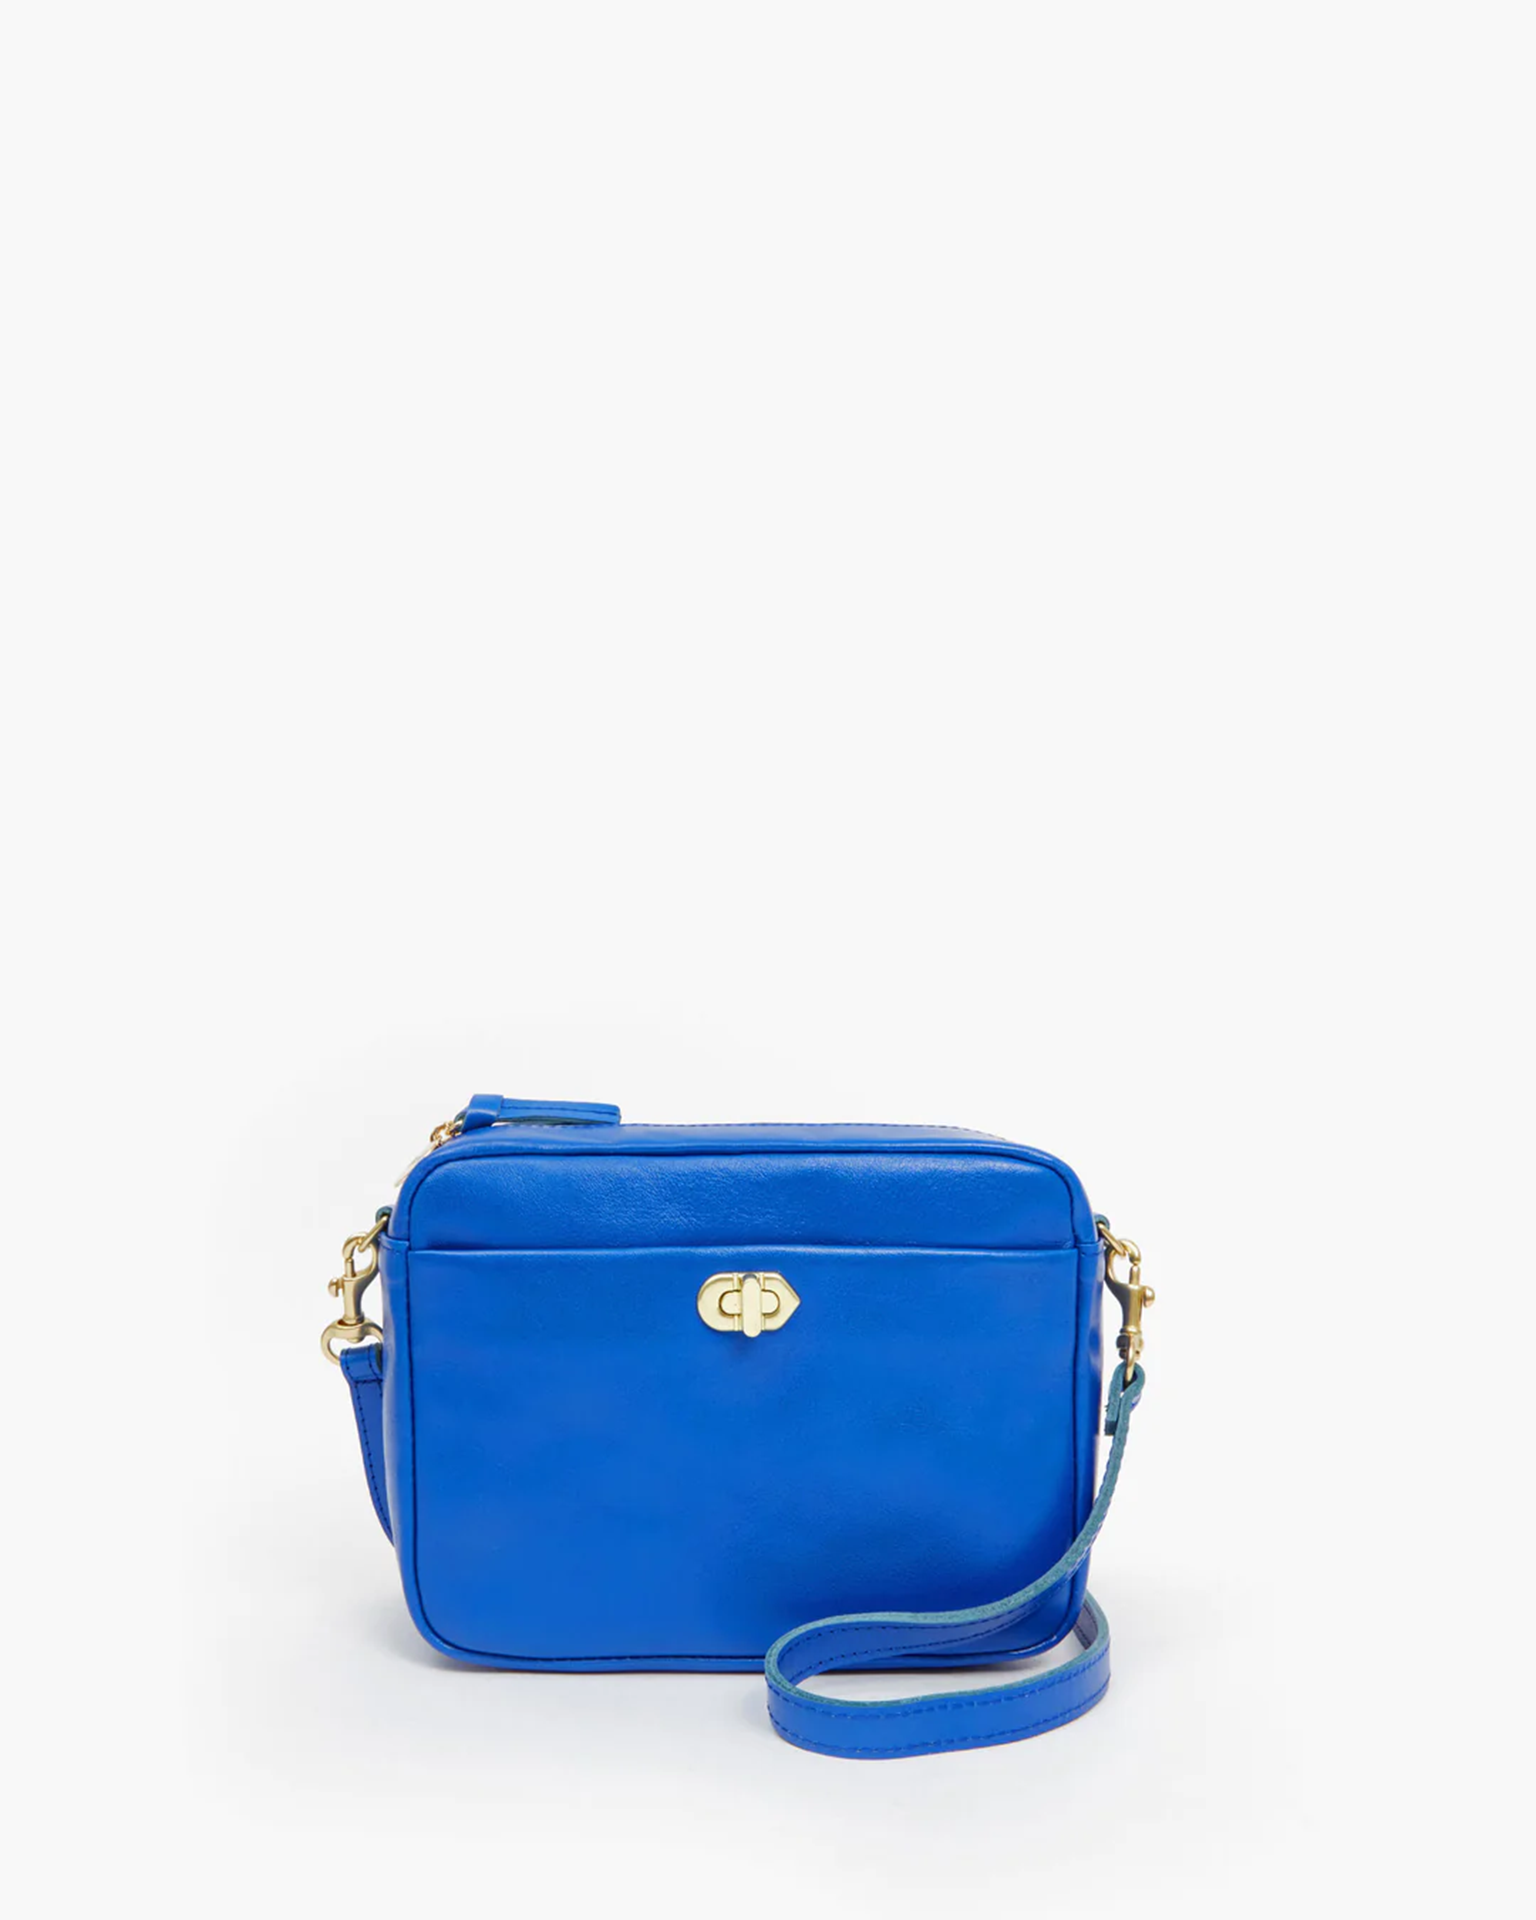 Clare V. Wallet Clutch w/ Tabs in Electric Blue - Bliss Boutiques